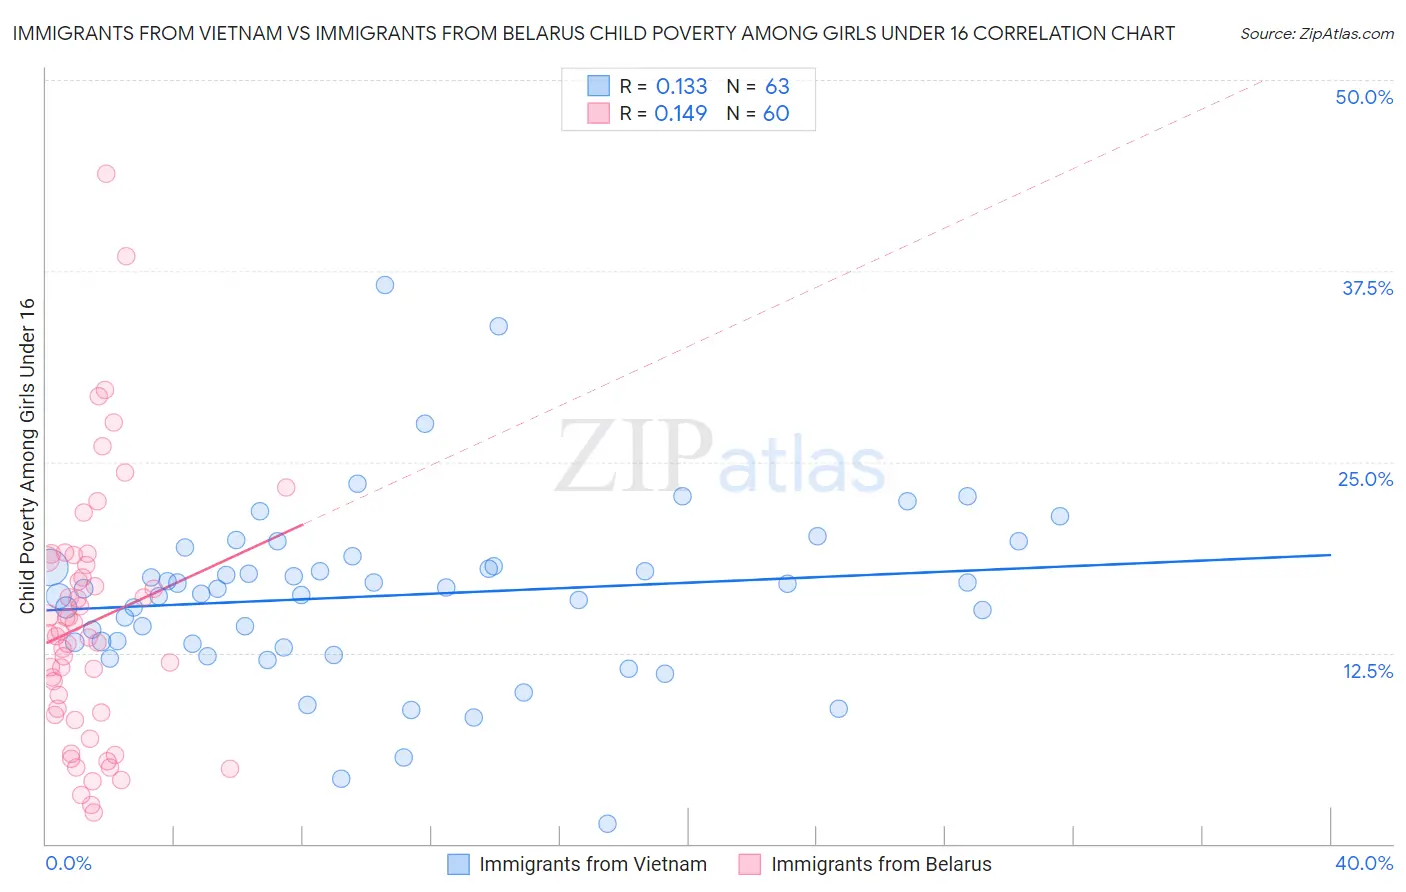 Immigrants from Vietnam vs Immigrants from Belarus Child Poverty Among Girls Under 16